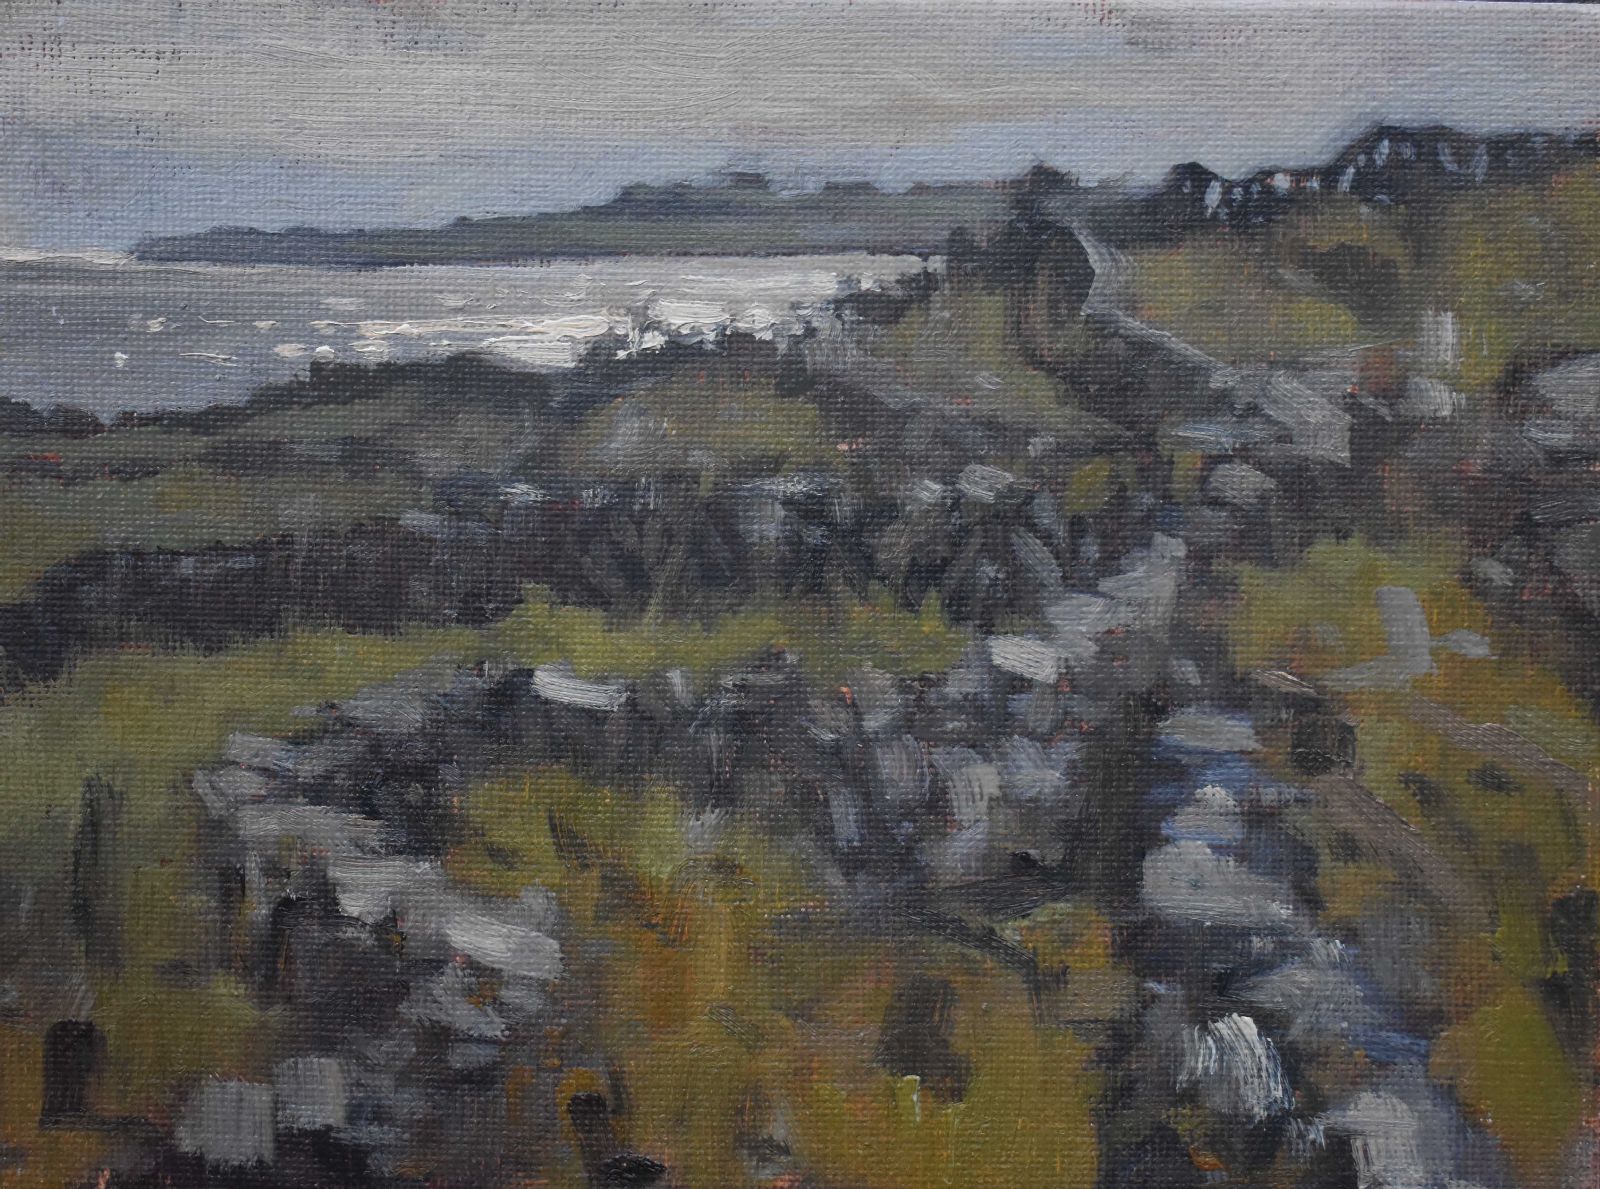 Stone Fields (Inisheer) by Dave West